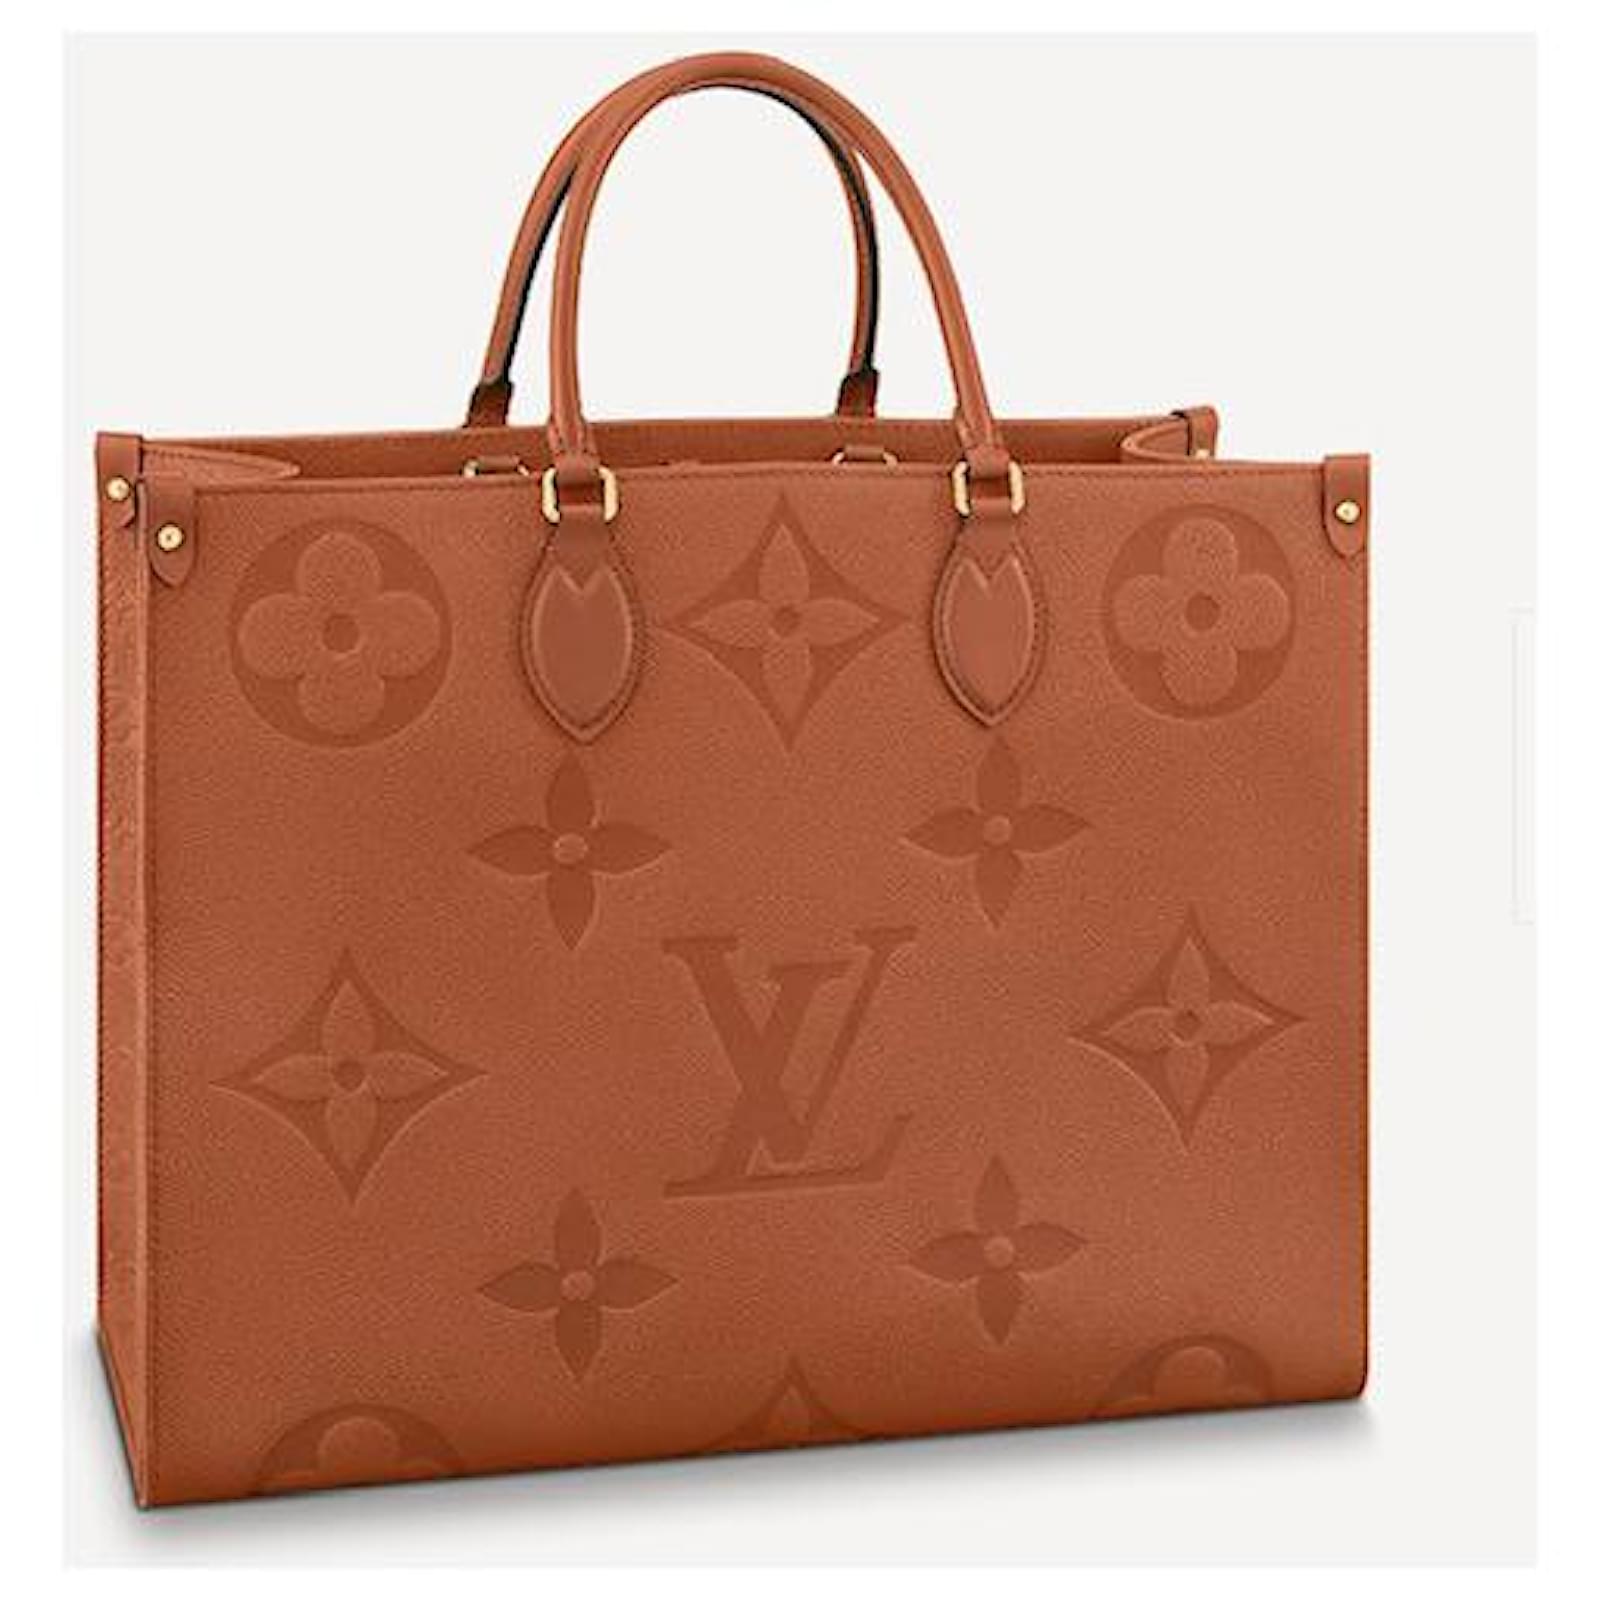 The new cognac color is 🤌🏽 #louisvuitton #lvonthegogm #onthego #hand